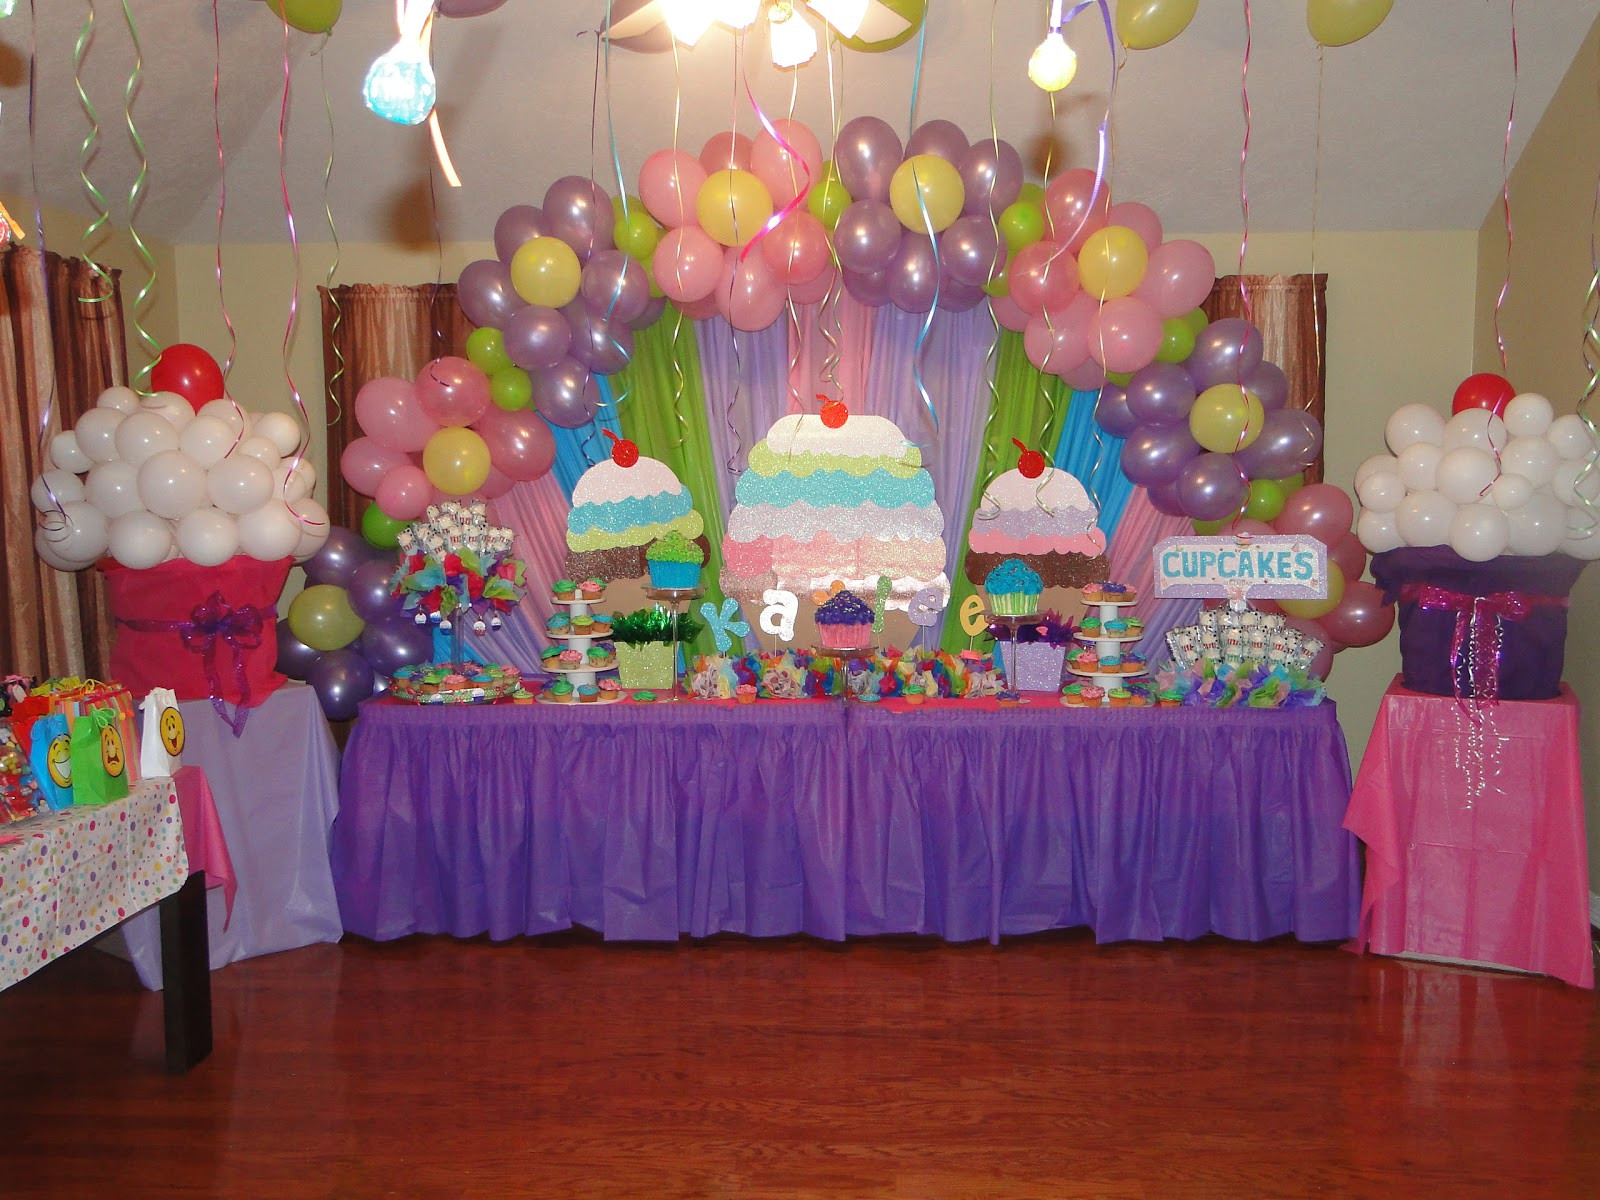 Cupcake Birthday Party Ideas
 Unfor table Creations Designed by Maria CUPCAKE THEMED